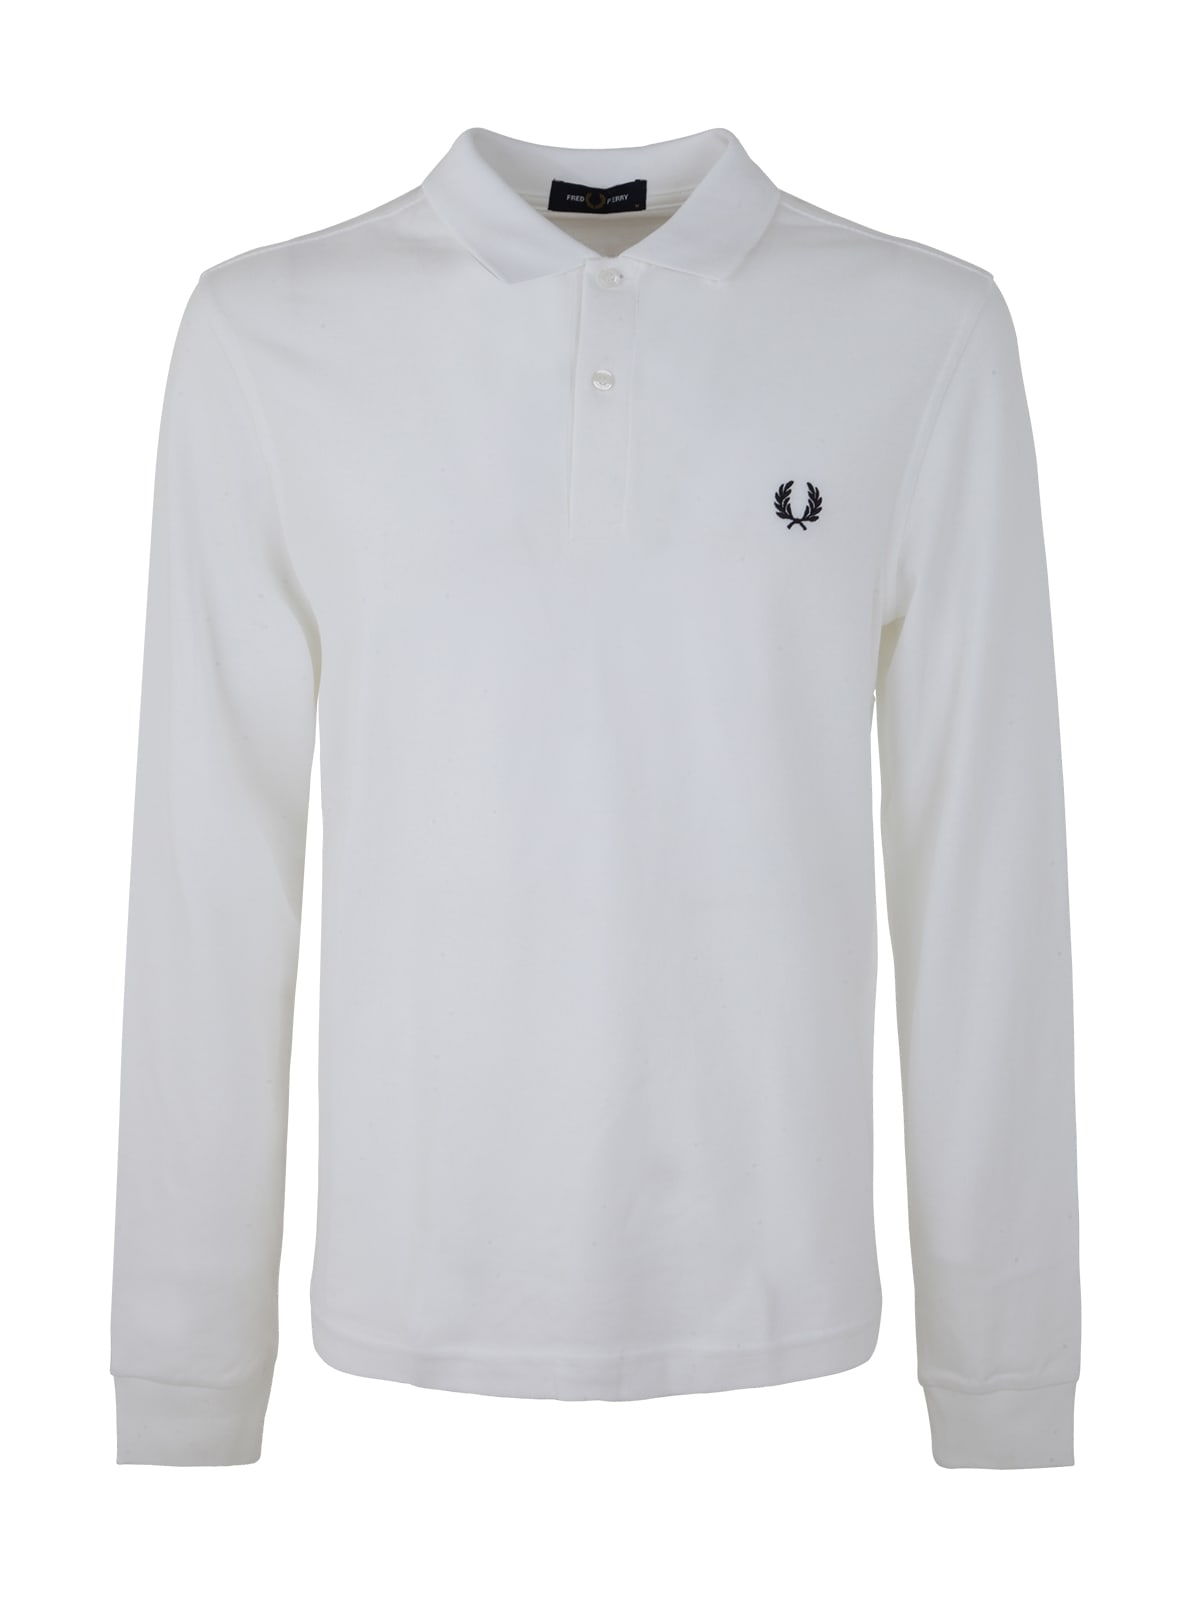 FRED PERRY FP LONG SLEEVED PLAIN SHIRT